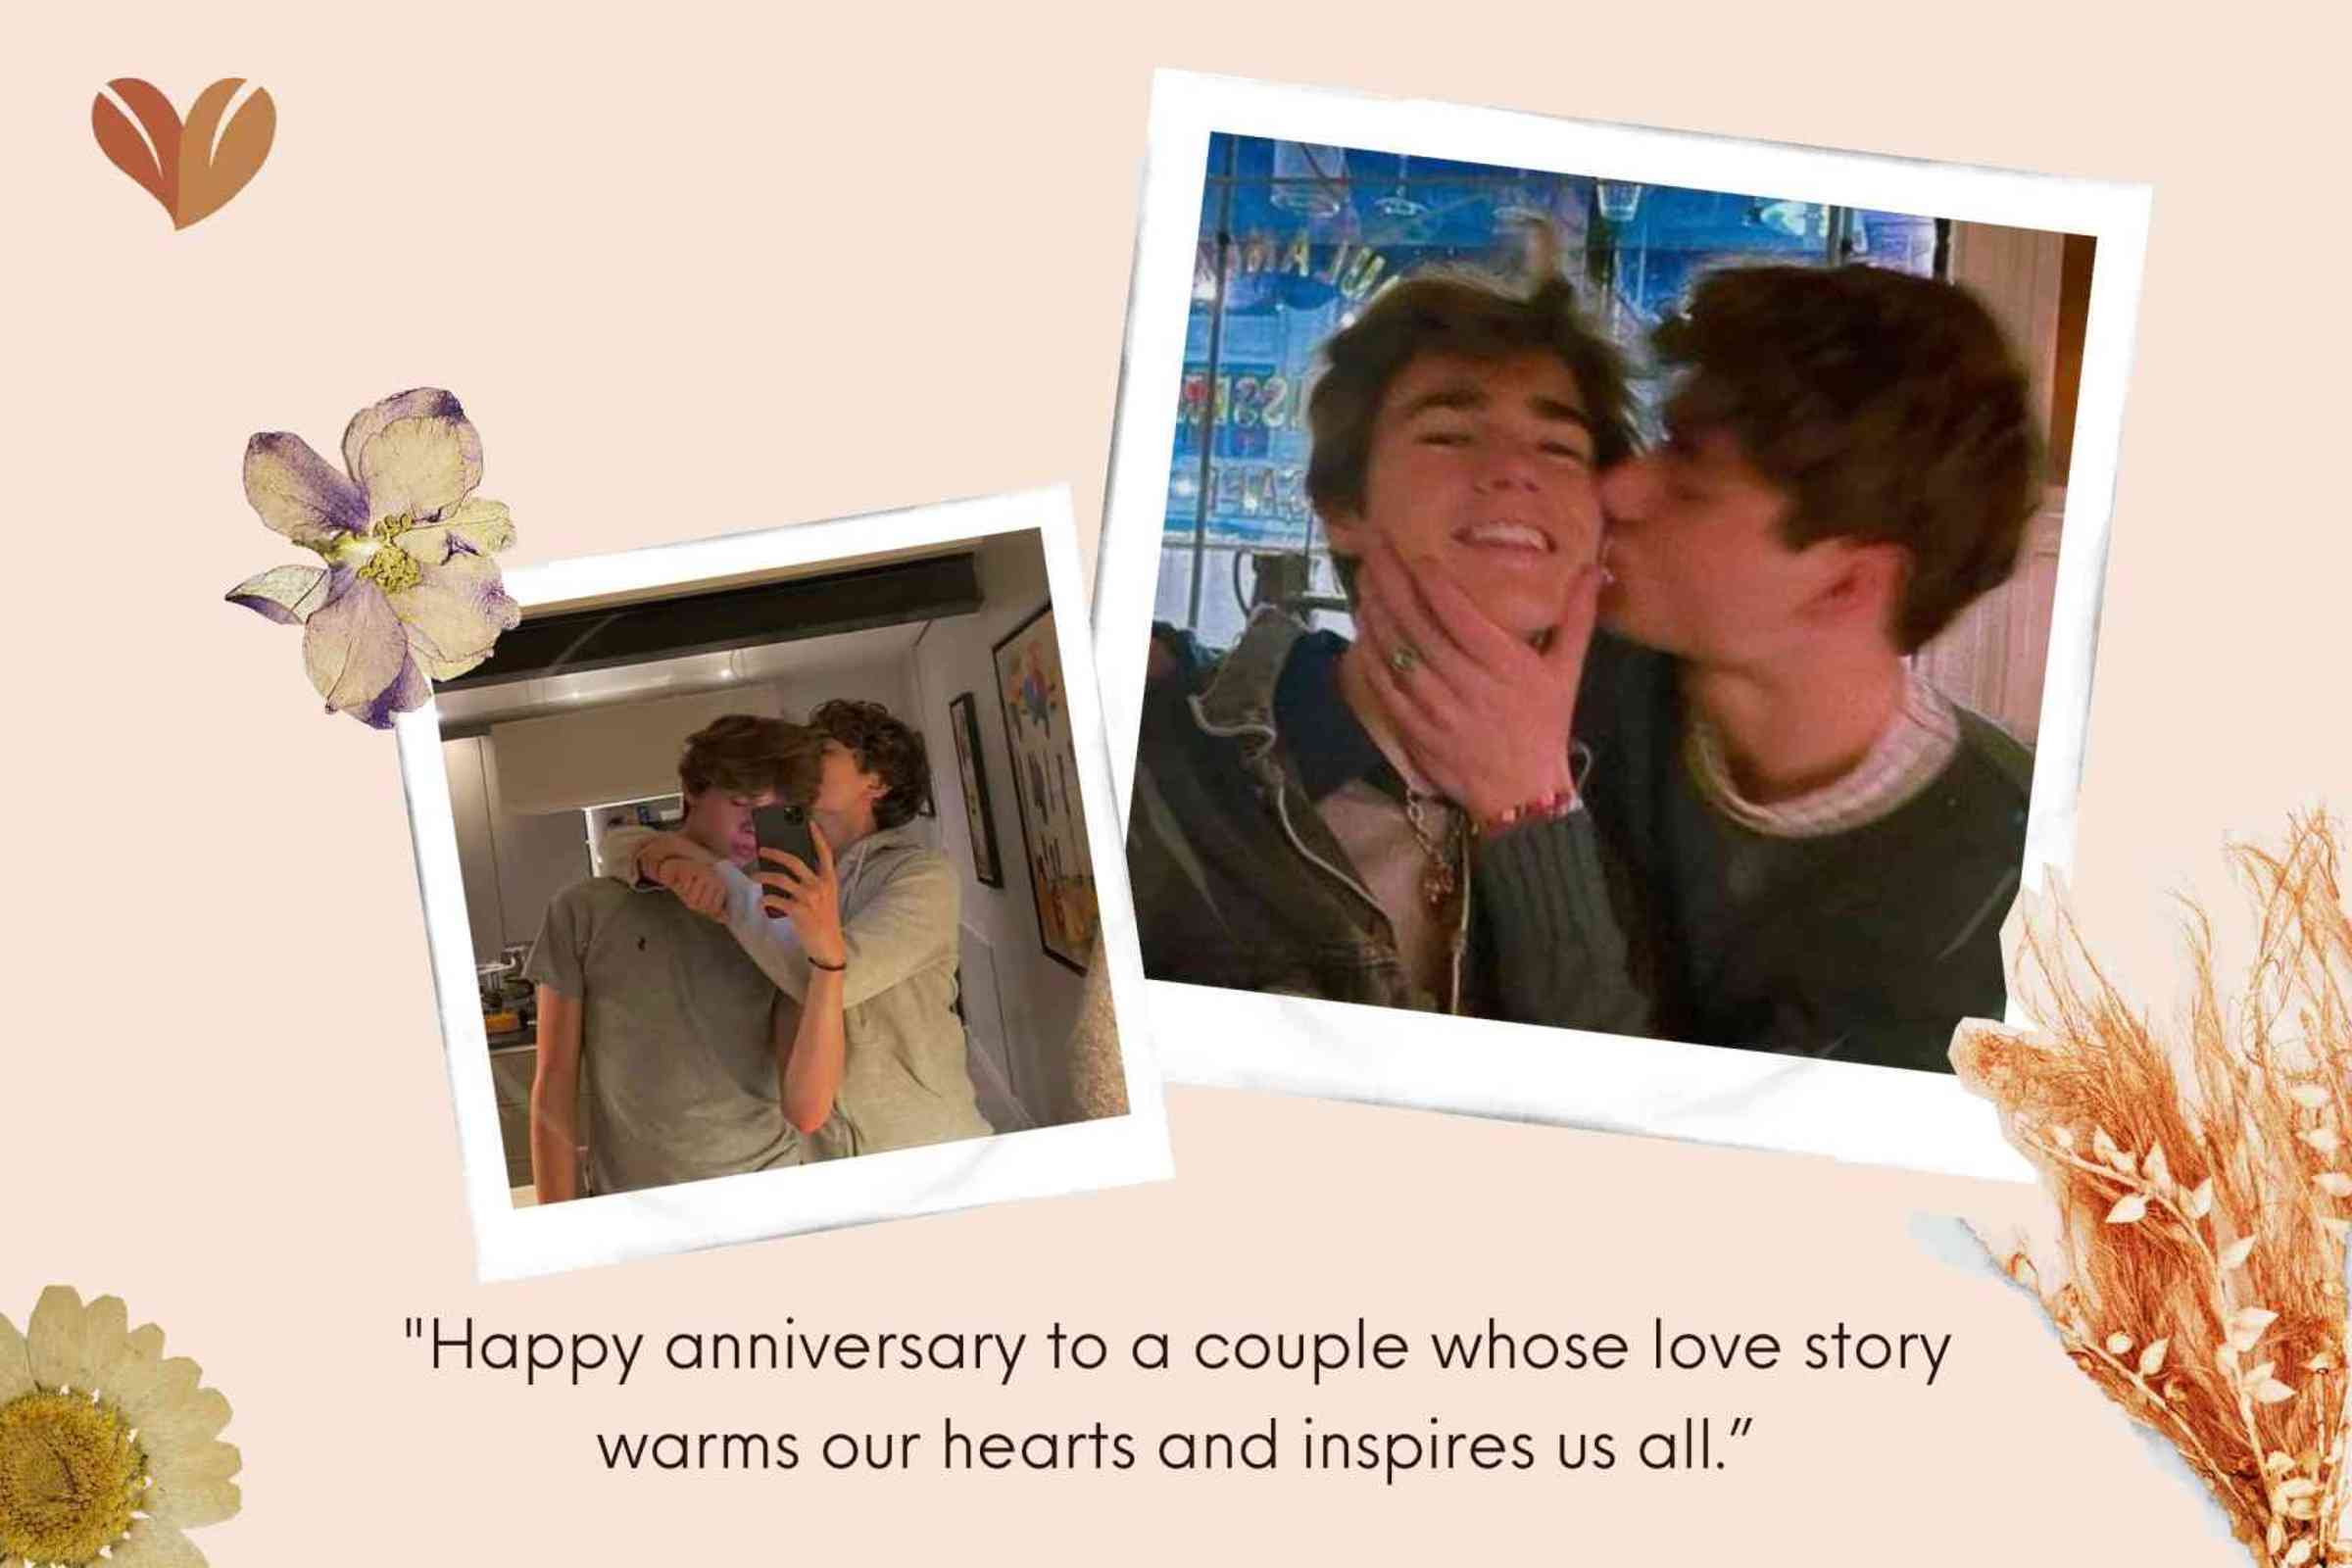 "Happy anniversary to a couple whose love story warms our hearts and inspires us all.”